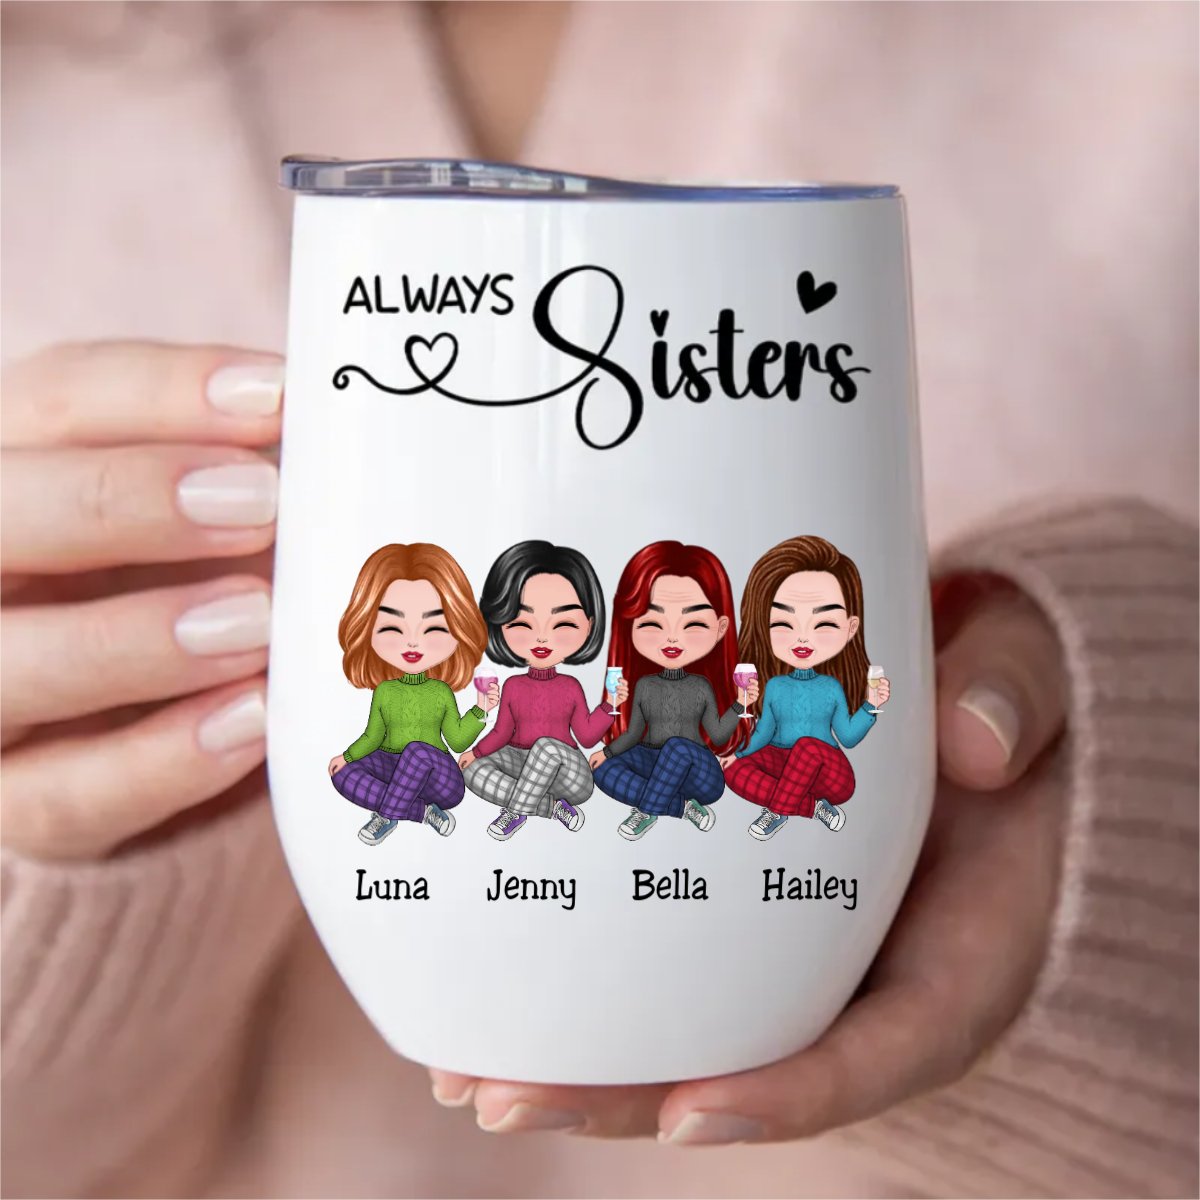 Sisters - Always Sisters - Personalized Wine Tumbler - The Next Custom Gift